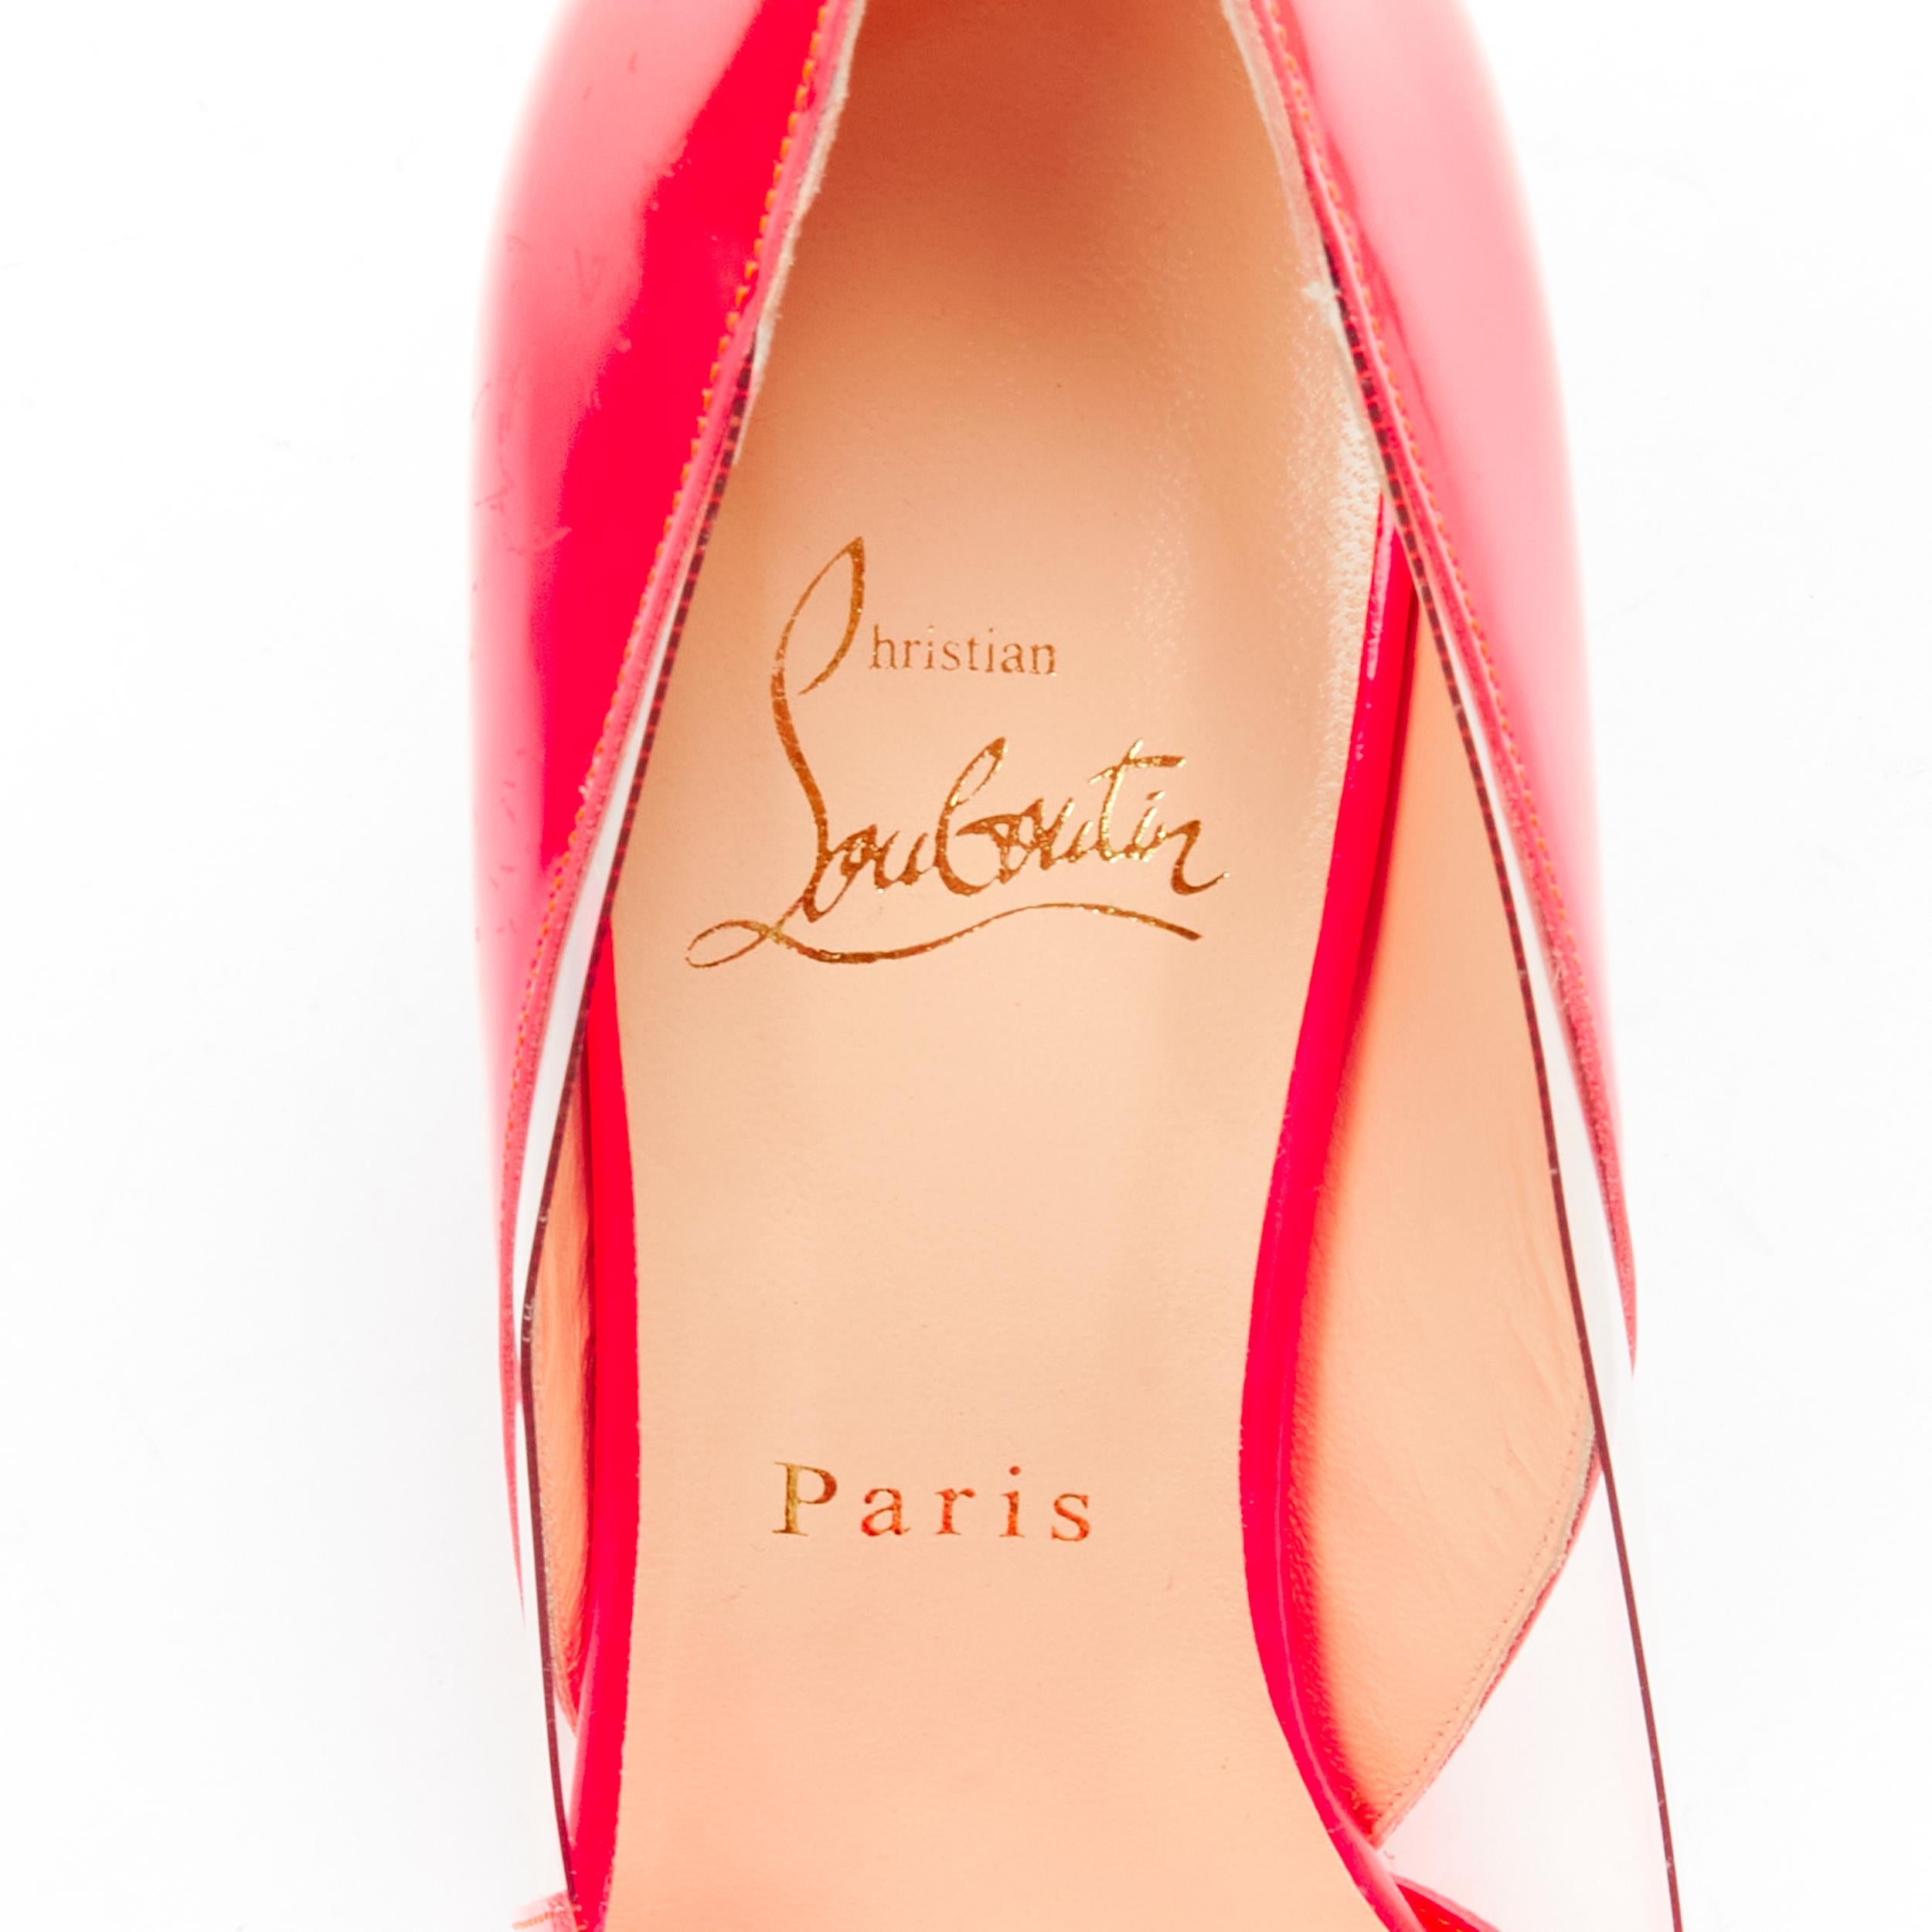 CHRISTIAN LOUBOUTIN Pivichic 100 neon pink striped patent pigalle pump EU37.5 For Sale 5